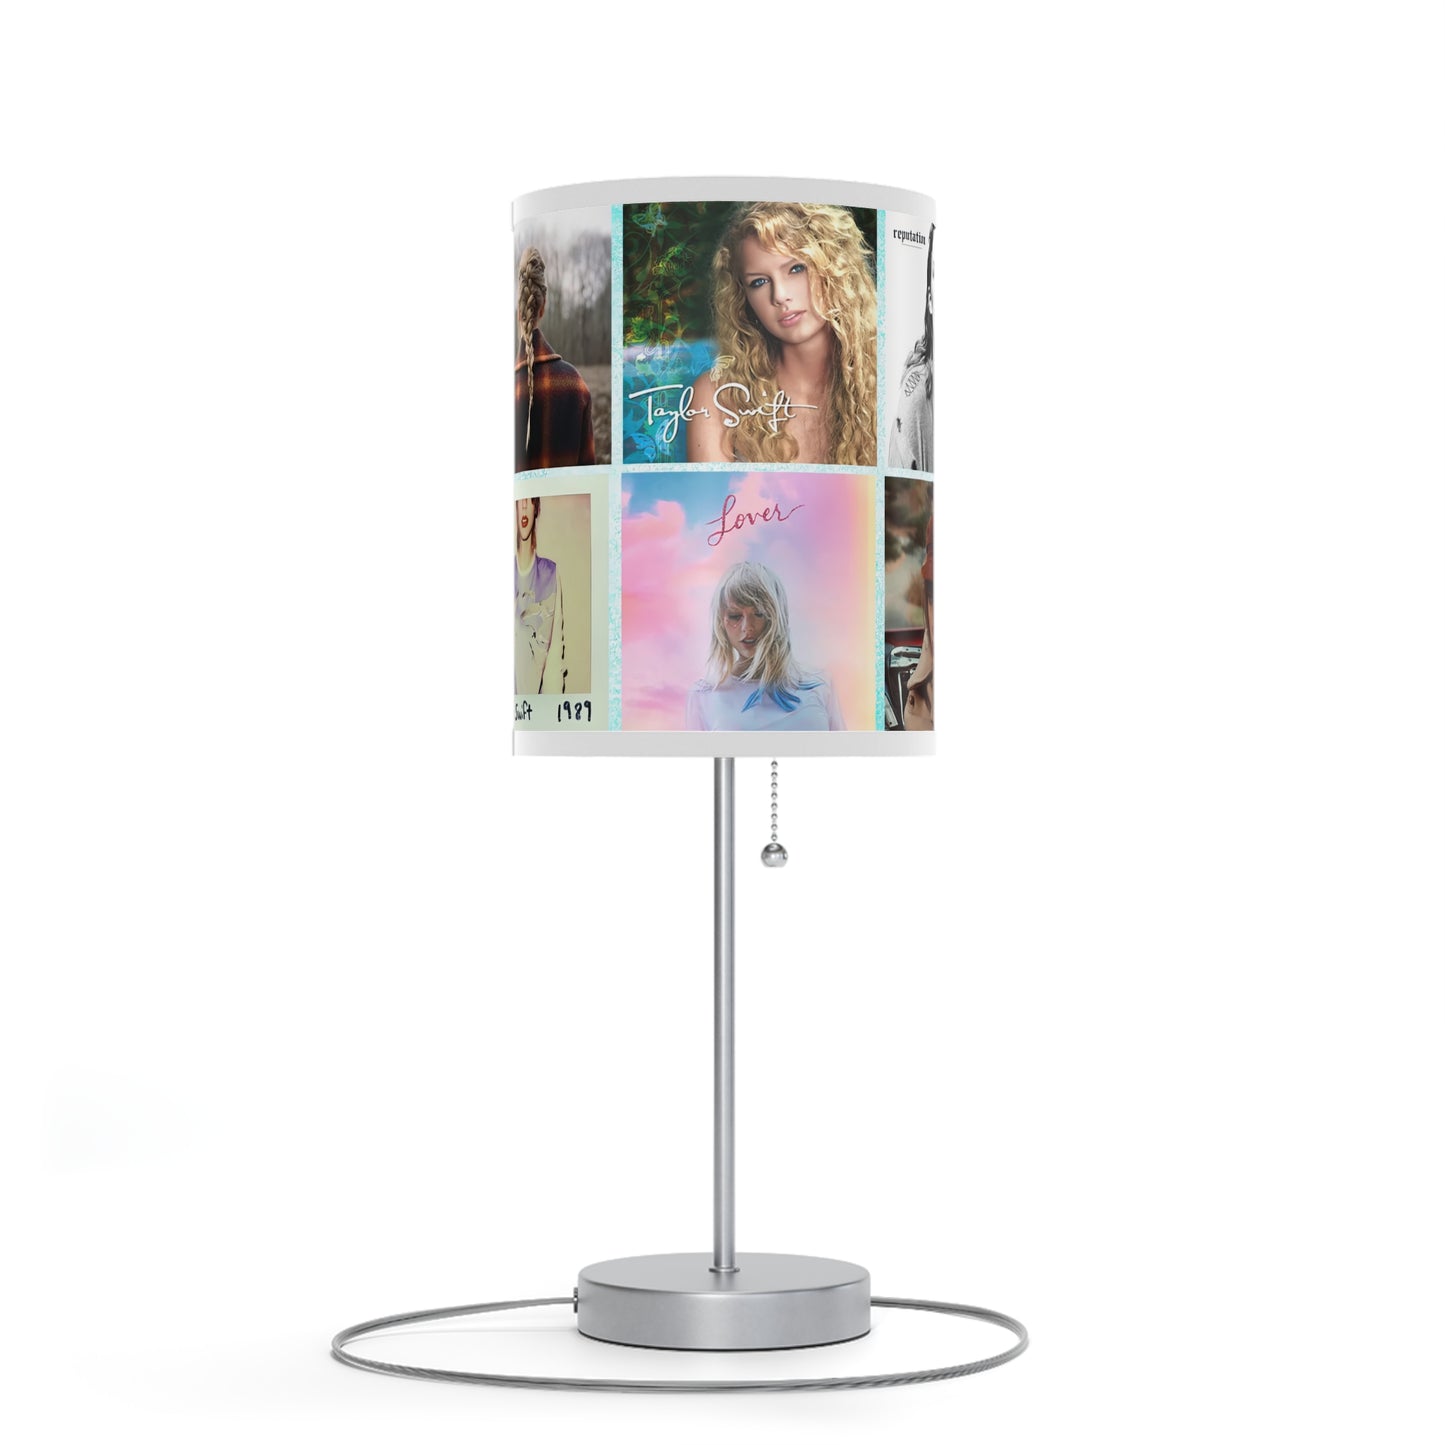 Taylor Swift Album Art Collage Pattern Lamp on a Stand